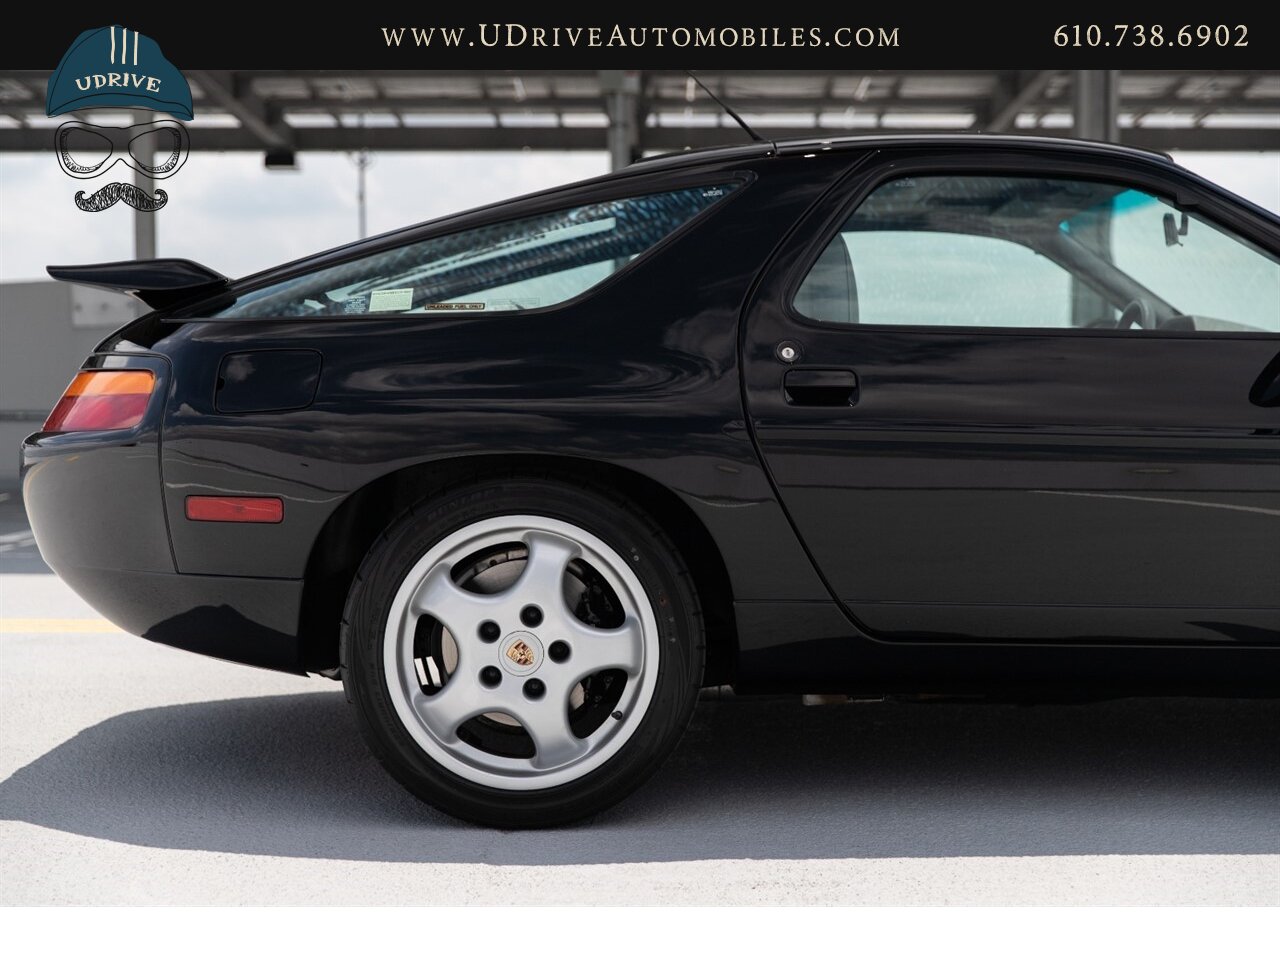 1993 Porsche 928 GTS Ultra Rare 5 Speed Service History  Collector Grade Example - Photo 16 - West Chester, PA 19382